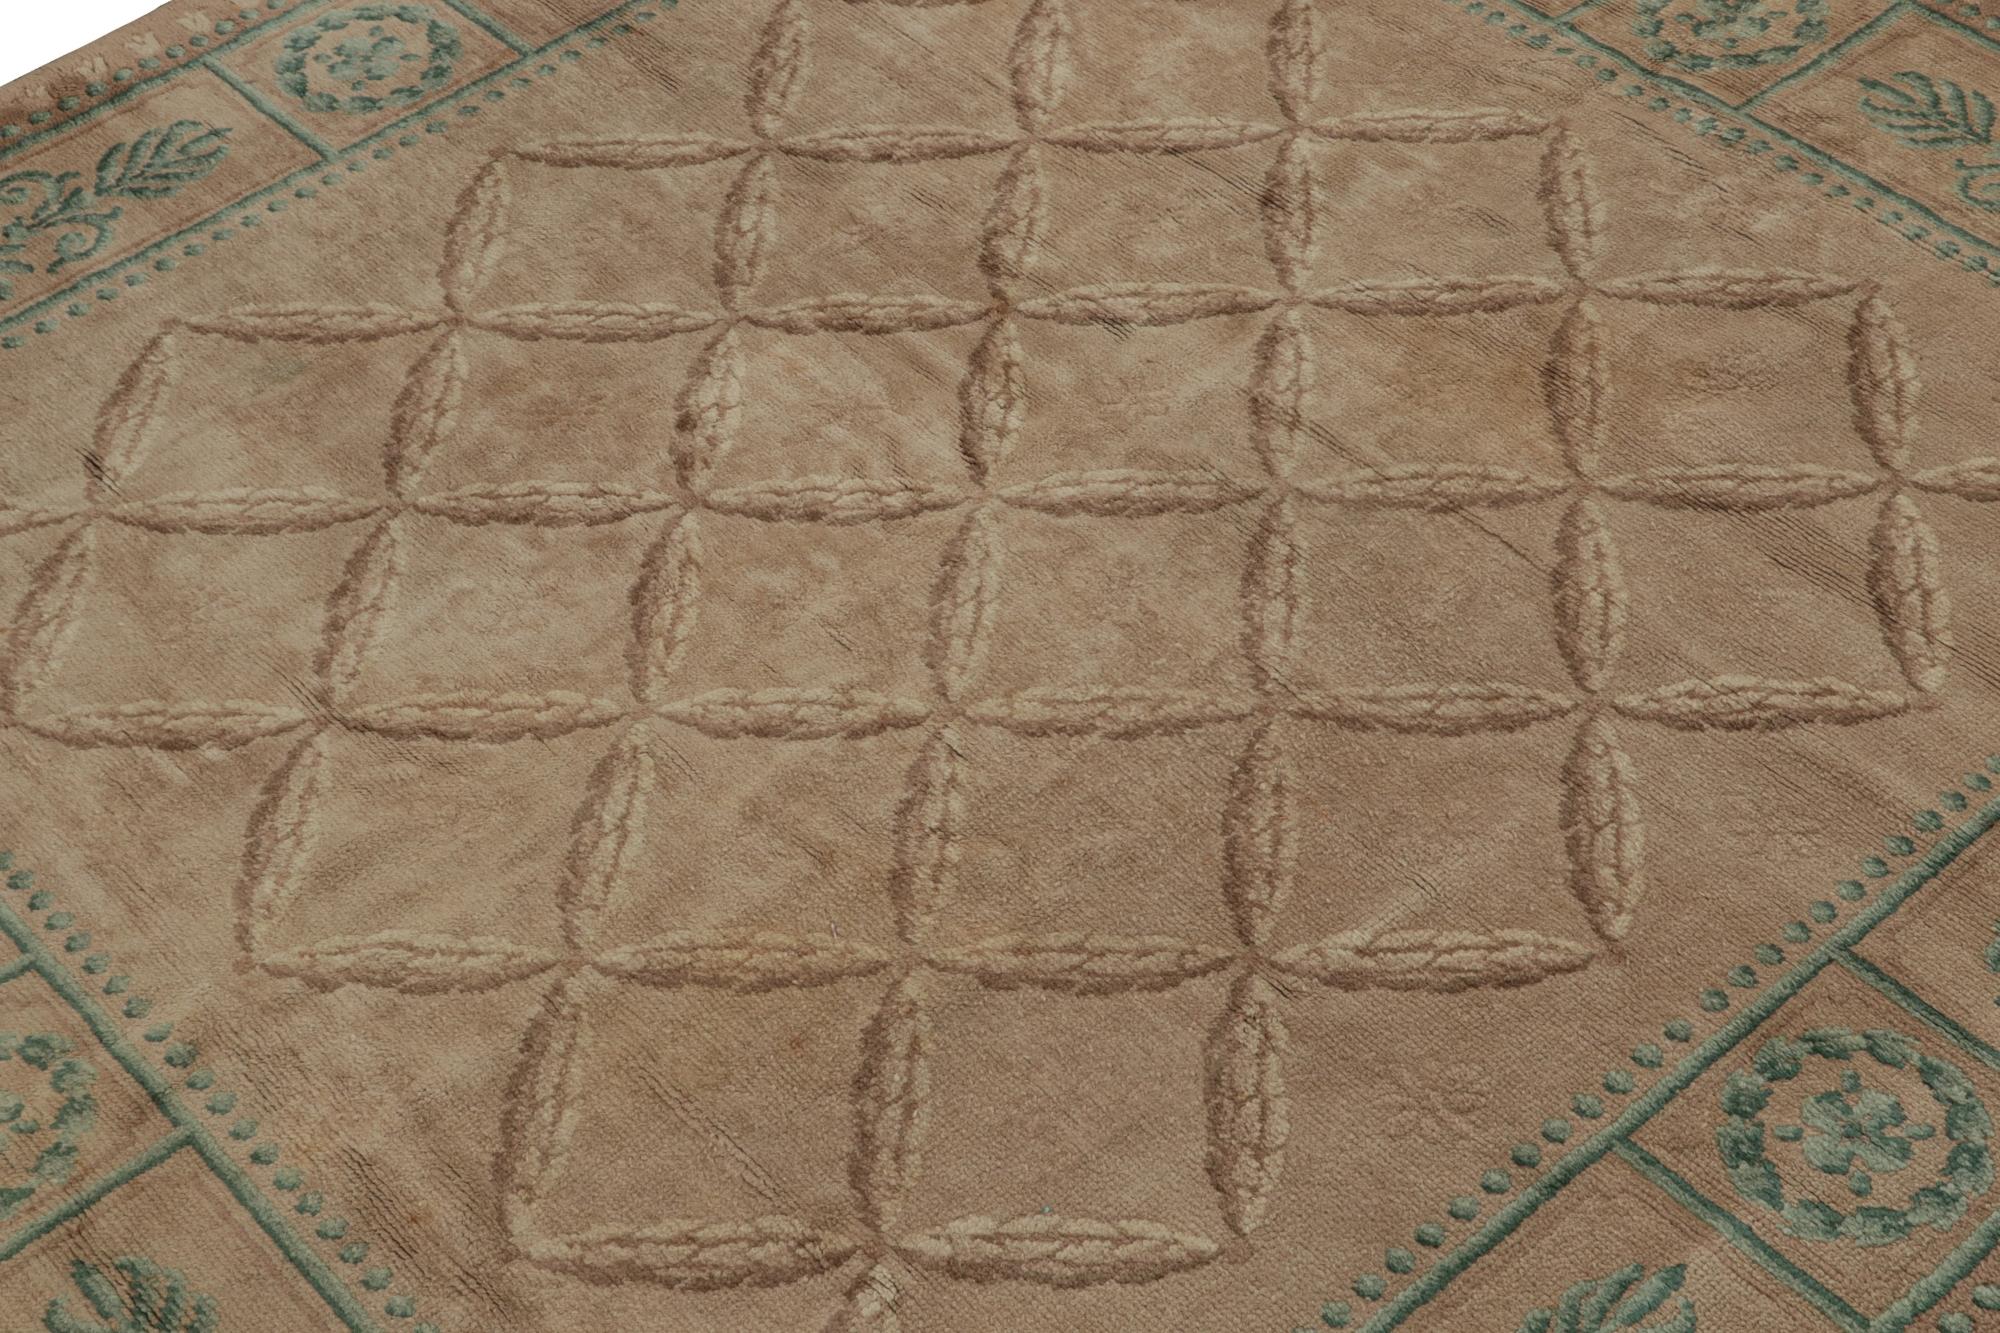 French  Antique Savonnerie Rug in Beige-Brown & Green Floral Patterns For Sale